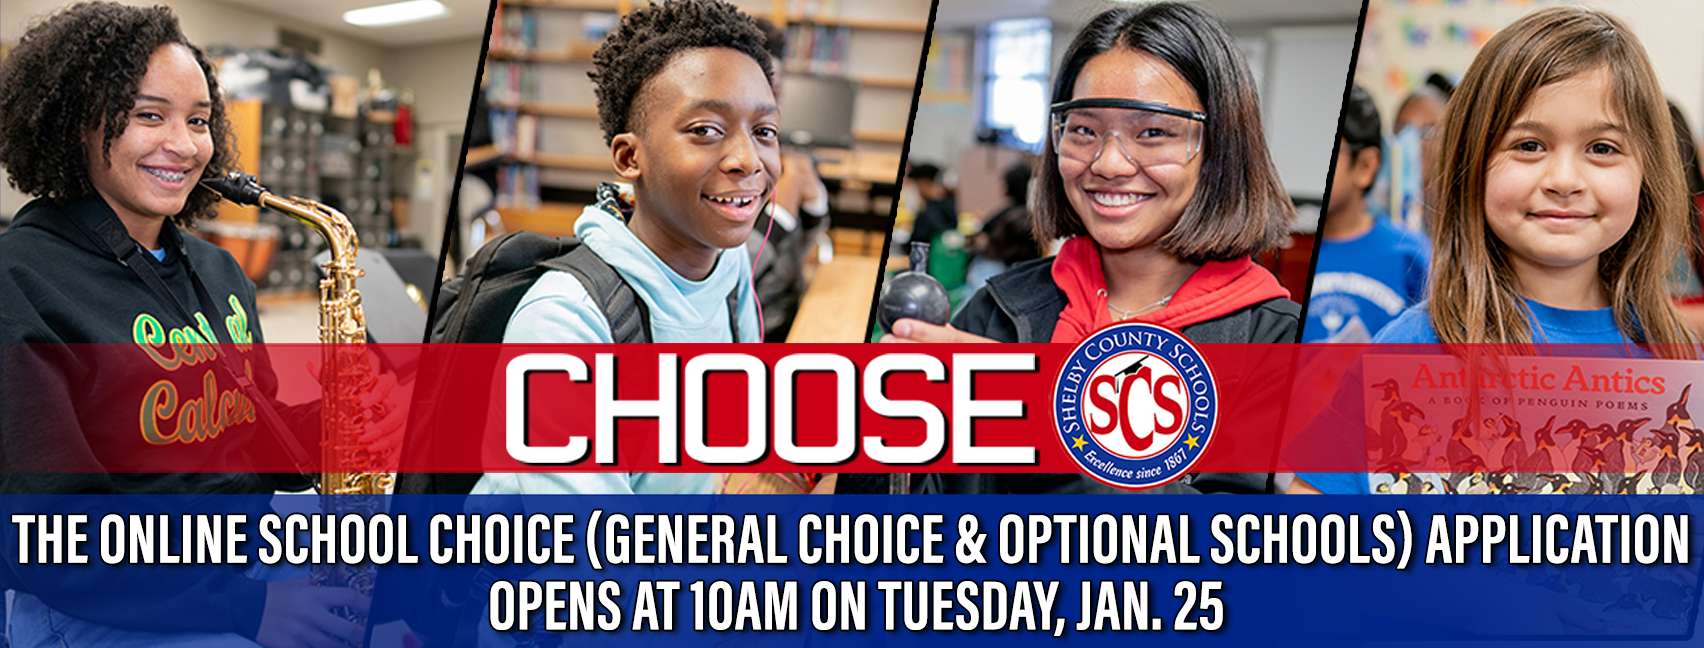 Choose SCS Opens 10am Tuesday, Jan. 25 banner